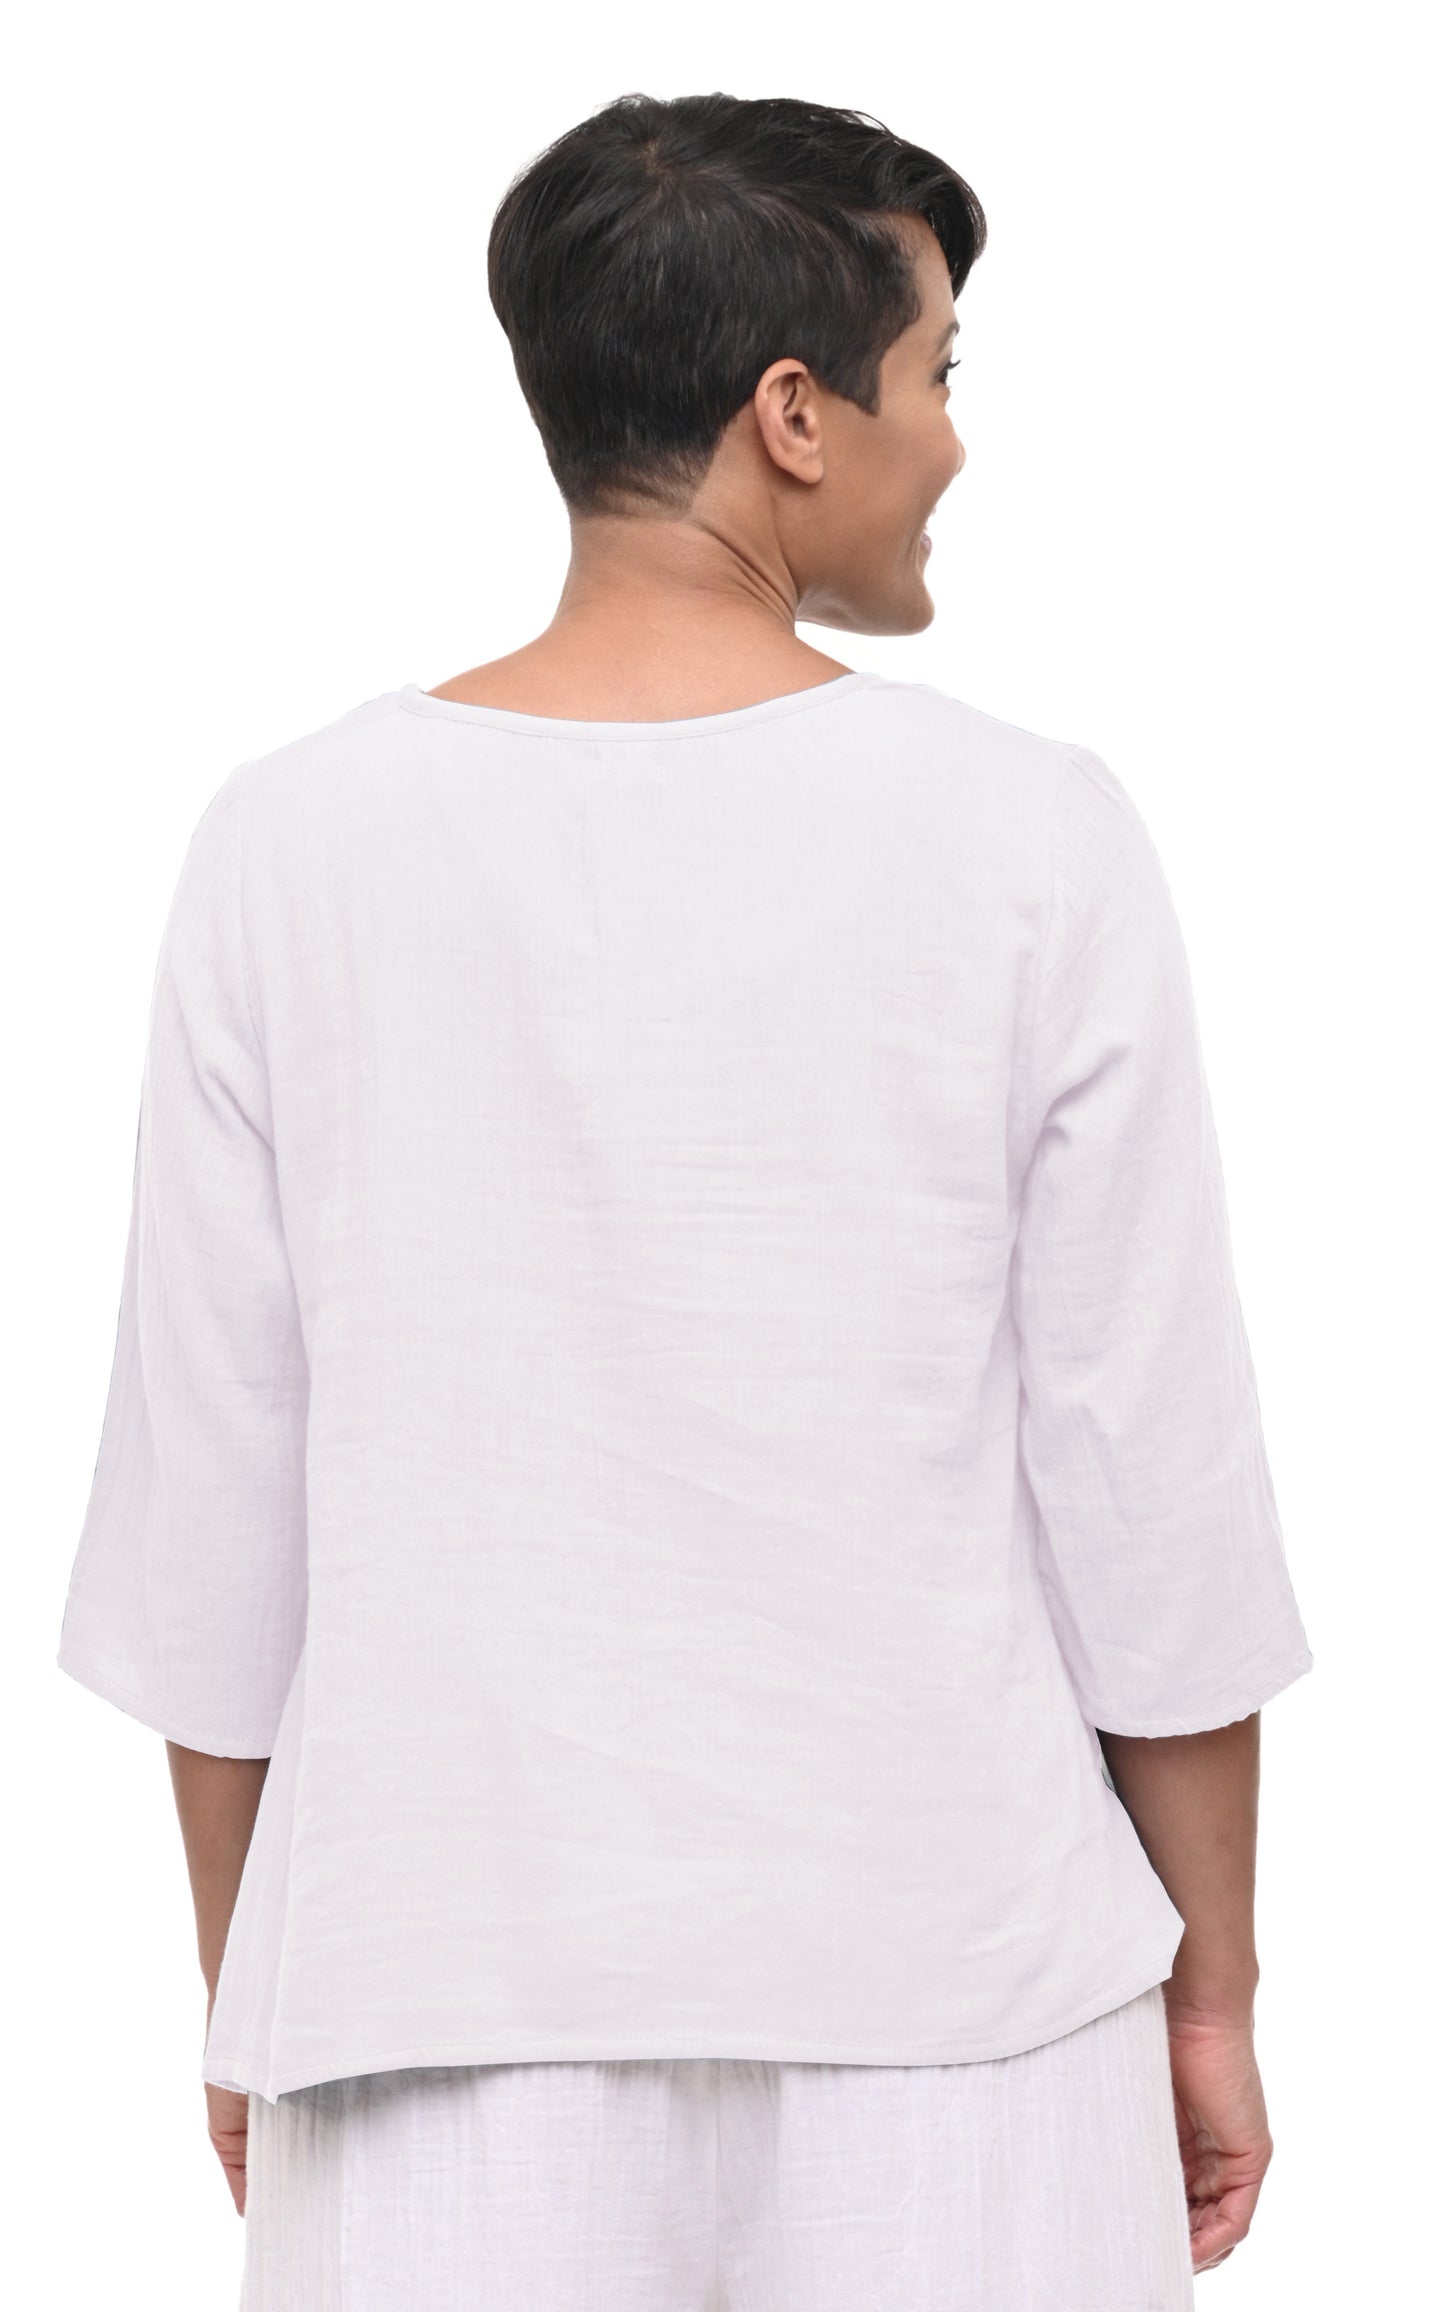 VCG431 Adeline Pullover Top in White*